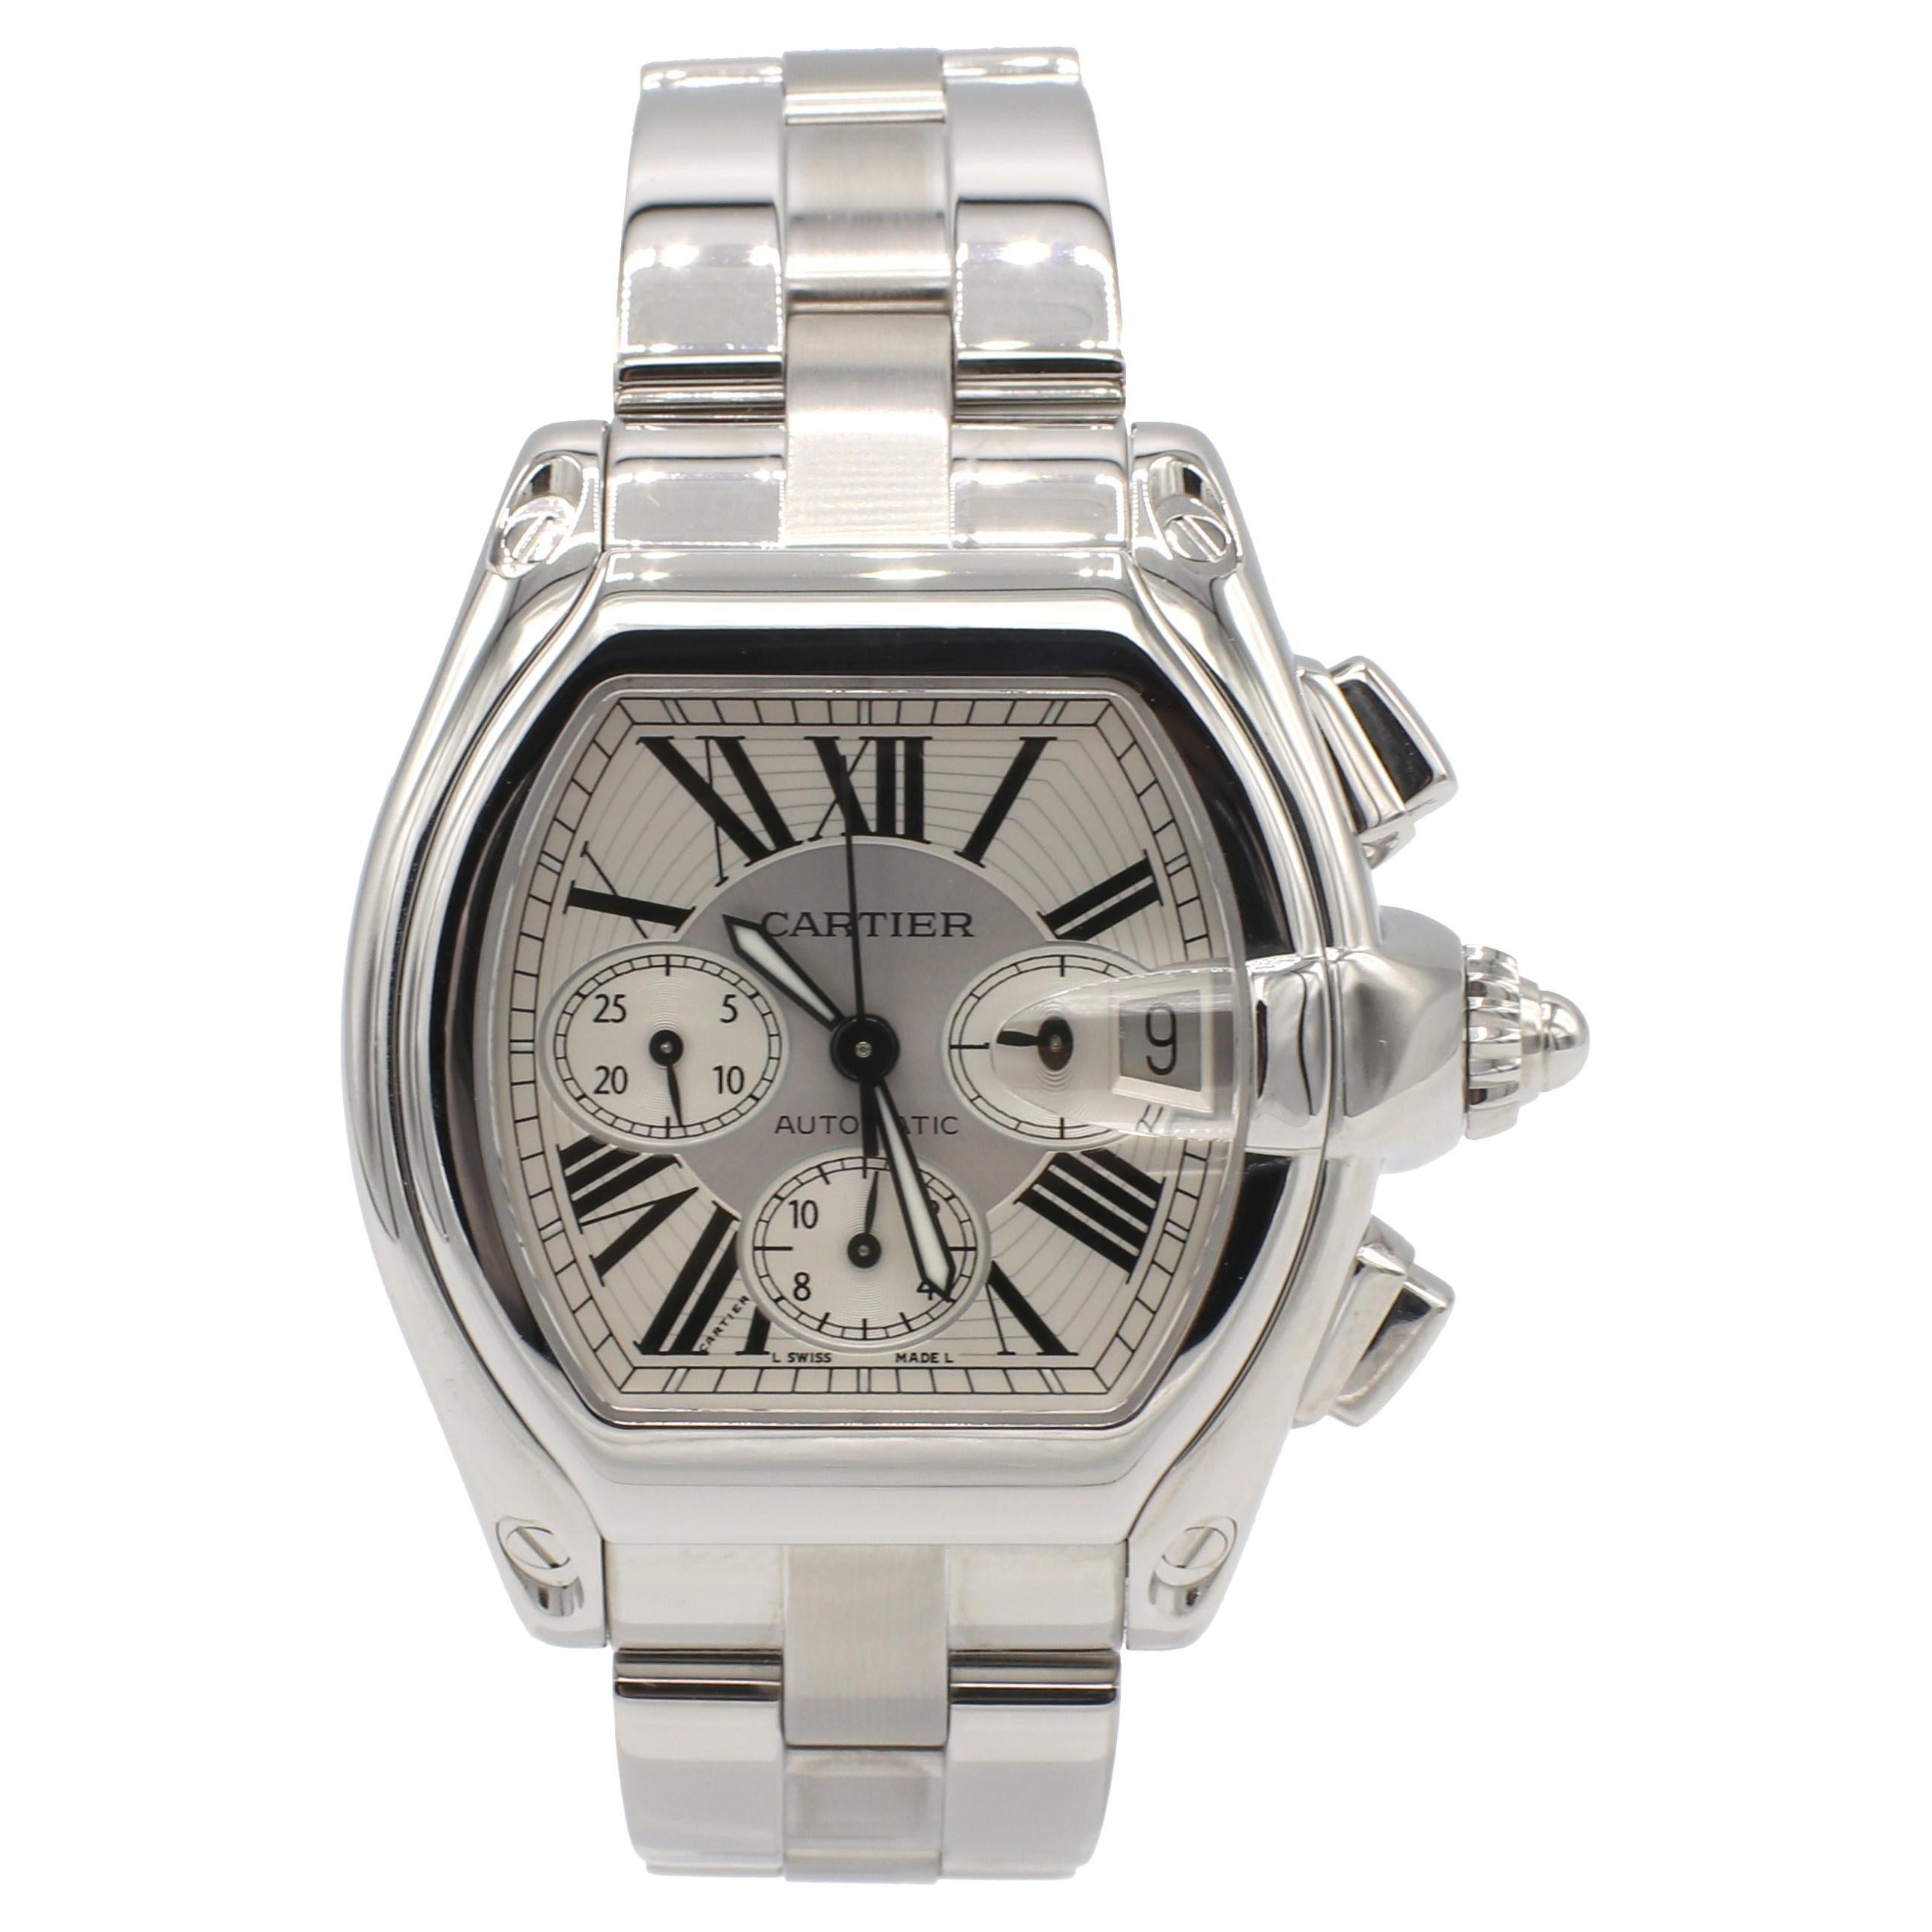 Cartier Roadster 2618 Automatic Stainless Steel Chronograph XL Watch